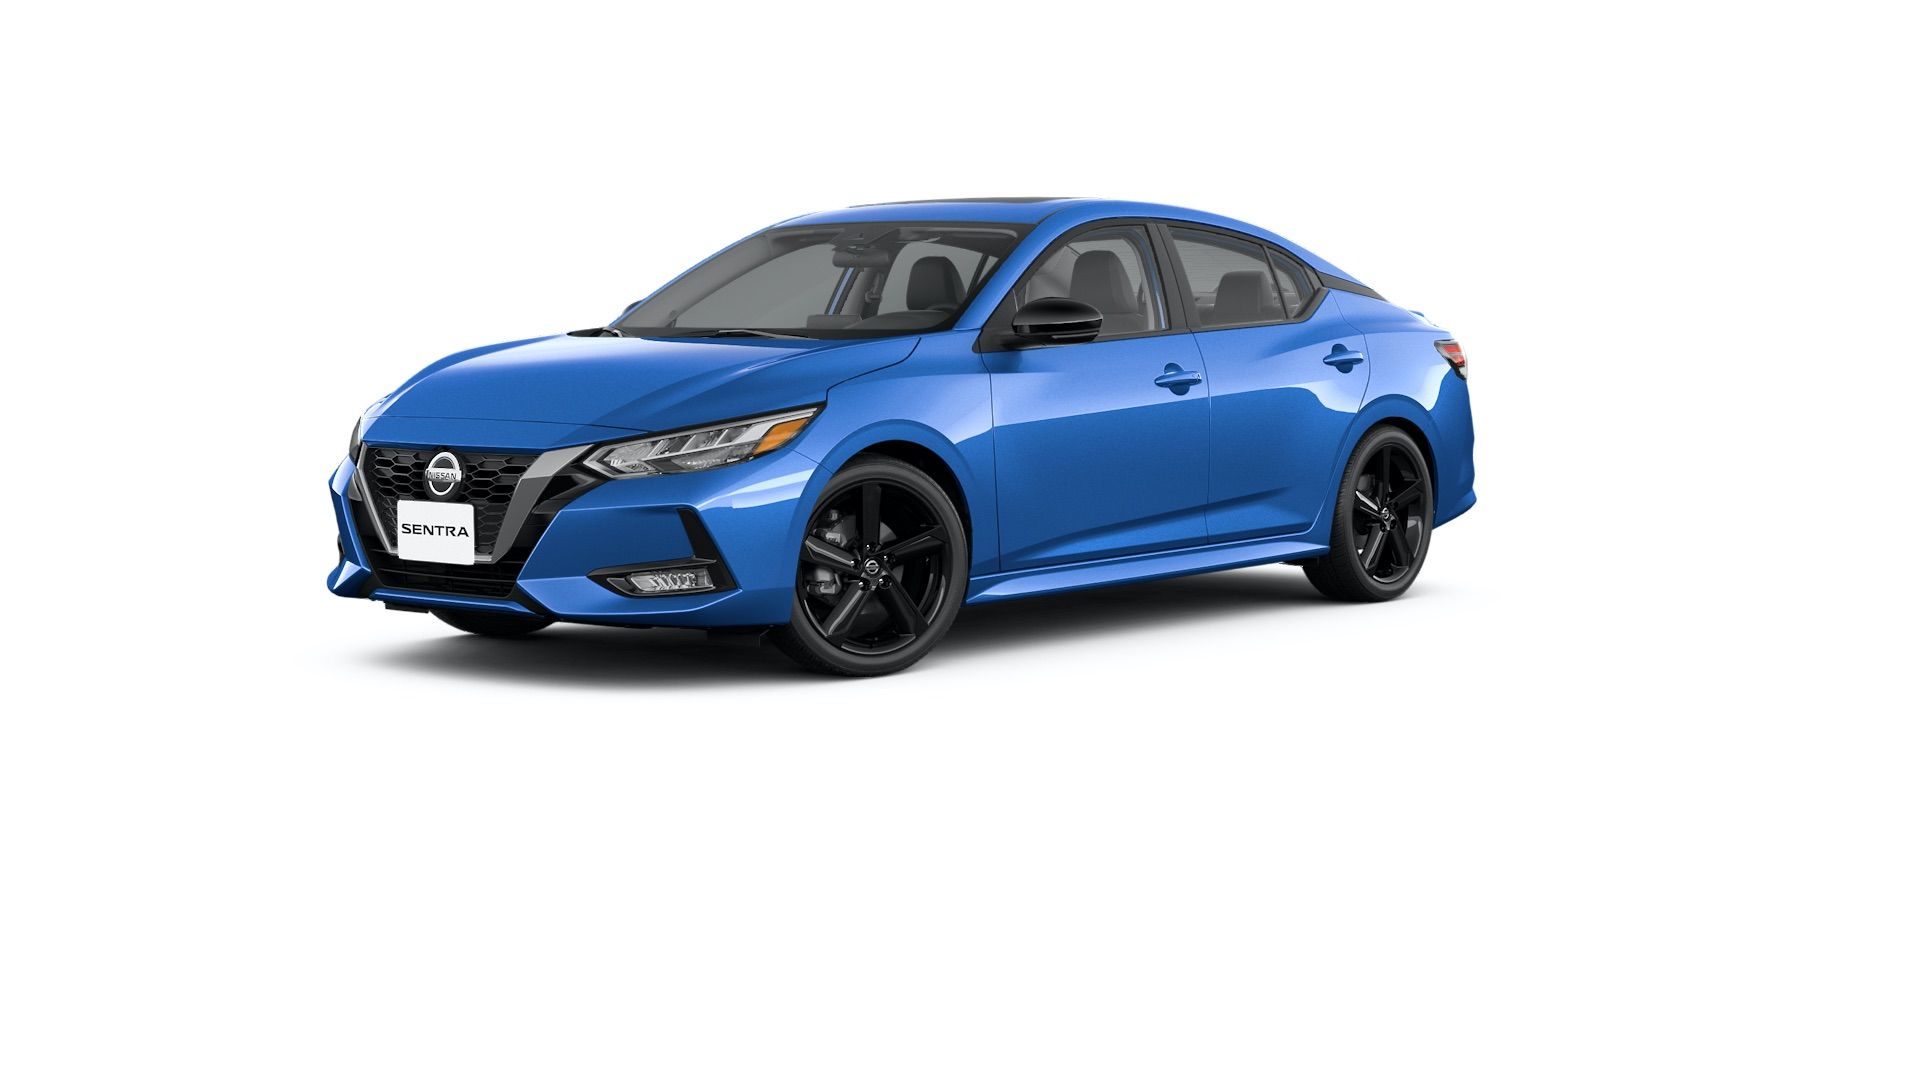 The Radically Redesigned 2020 Nissan Sentra Becomes The Even Better Equipped 2021 Nissan Sentra